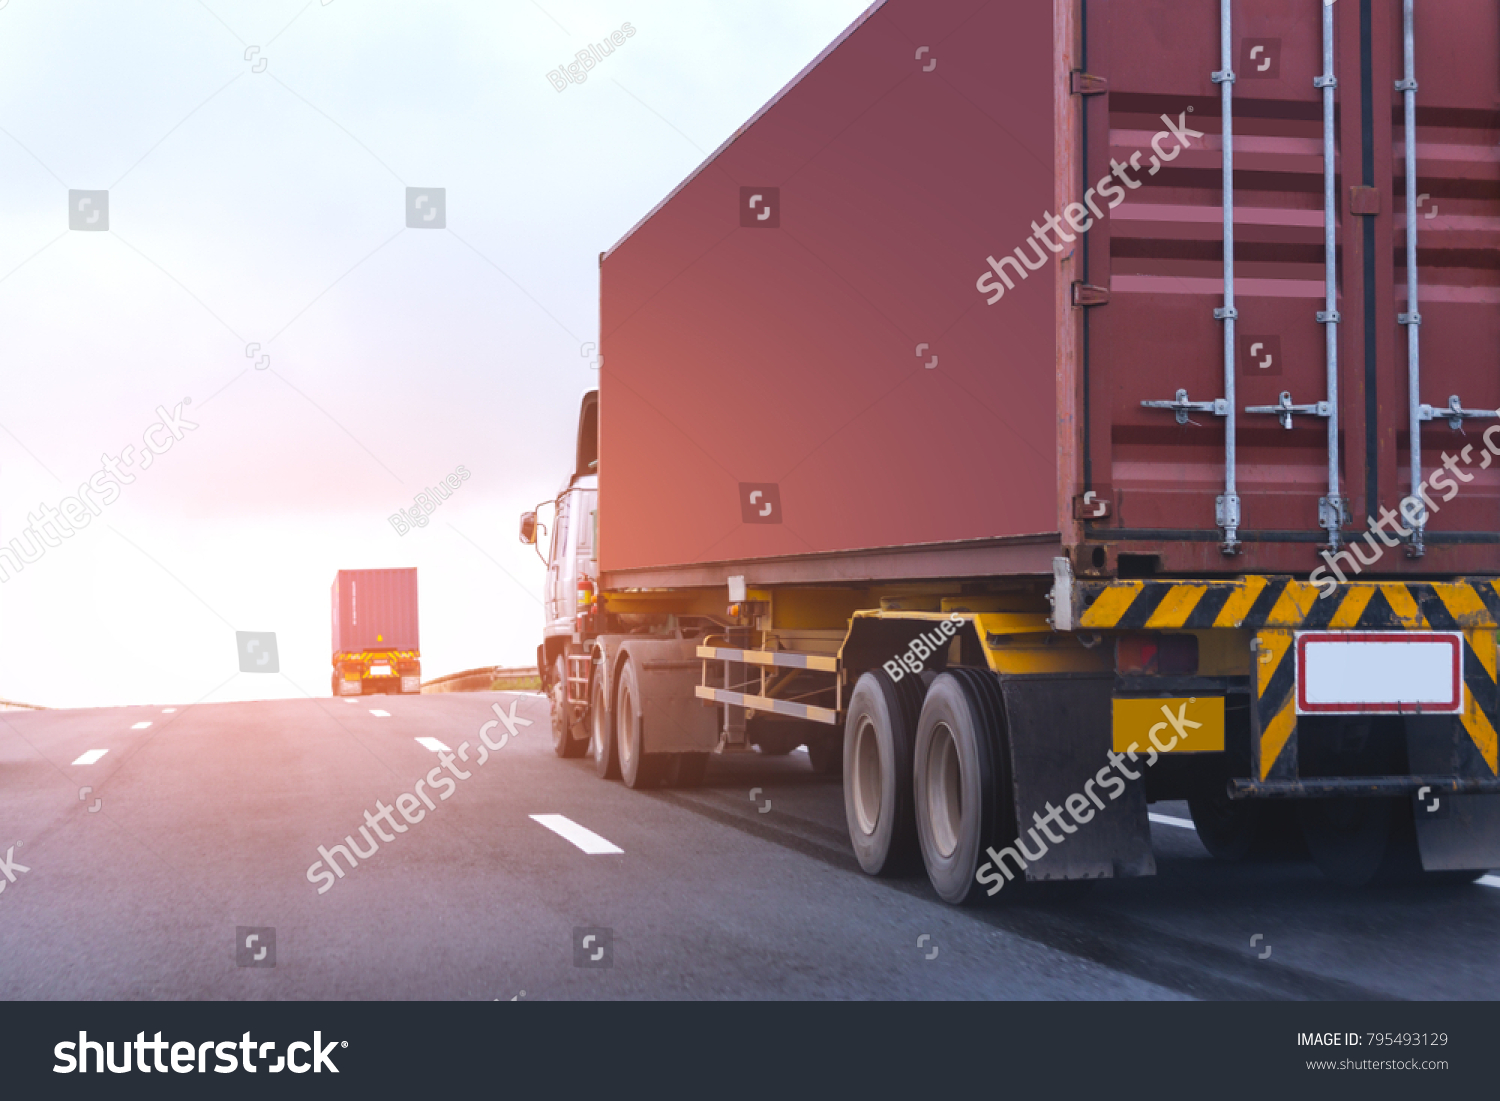 Truck on highway road with red container, transportation concept.,import,export logistic industrial Transporting Land transport on the asphalt expressway with blue sky #795493129